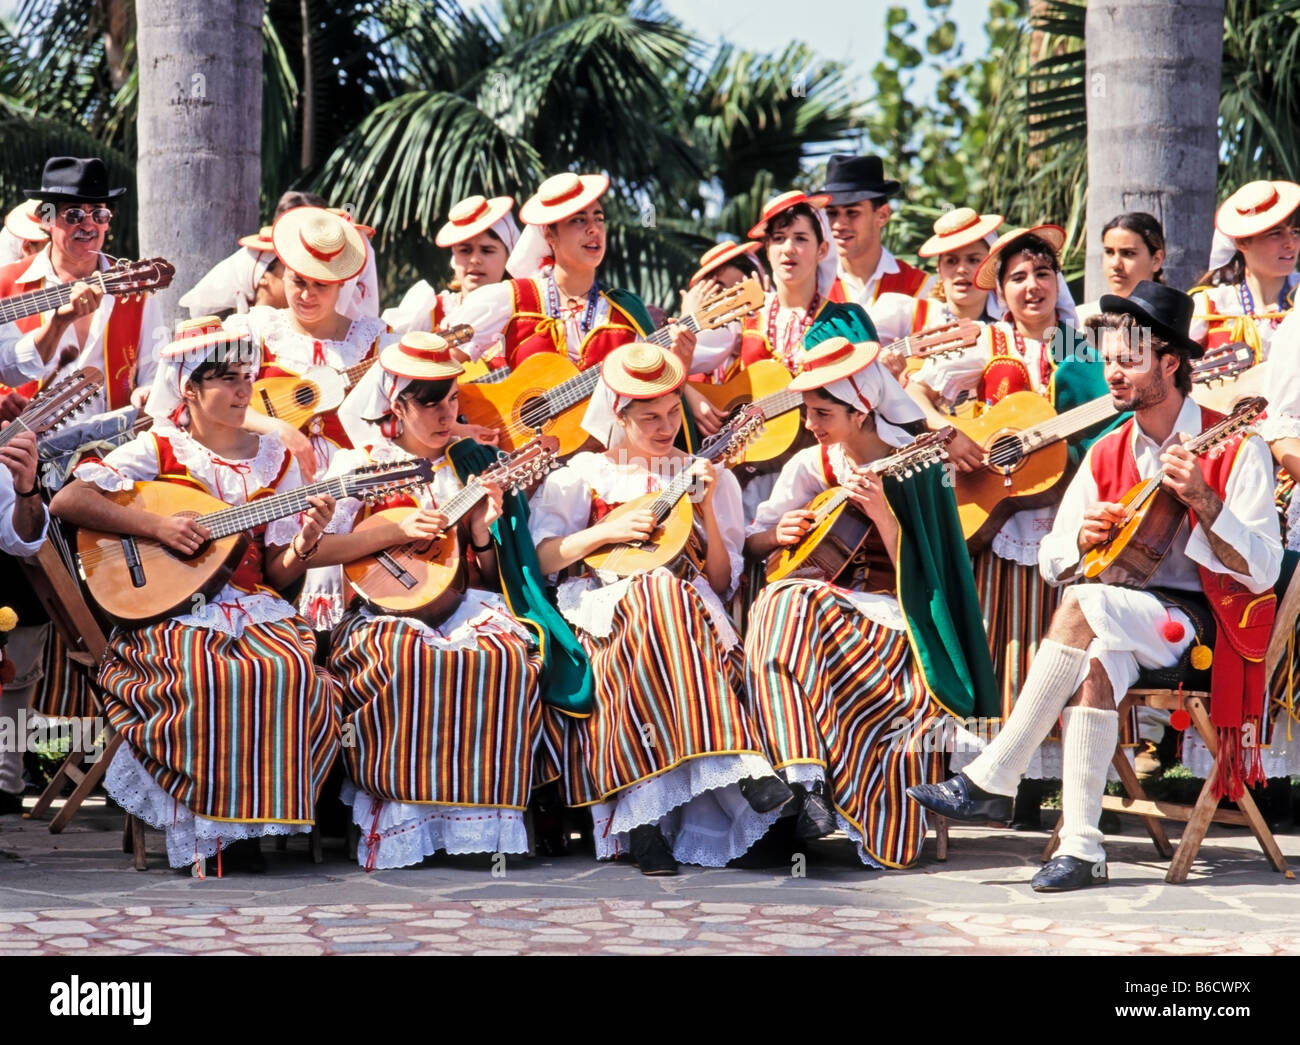 Spain, Canaries, Tenerife, Traditional Musical Group Stock Photo